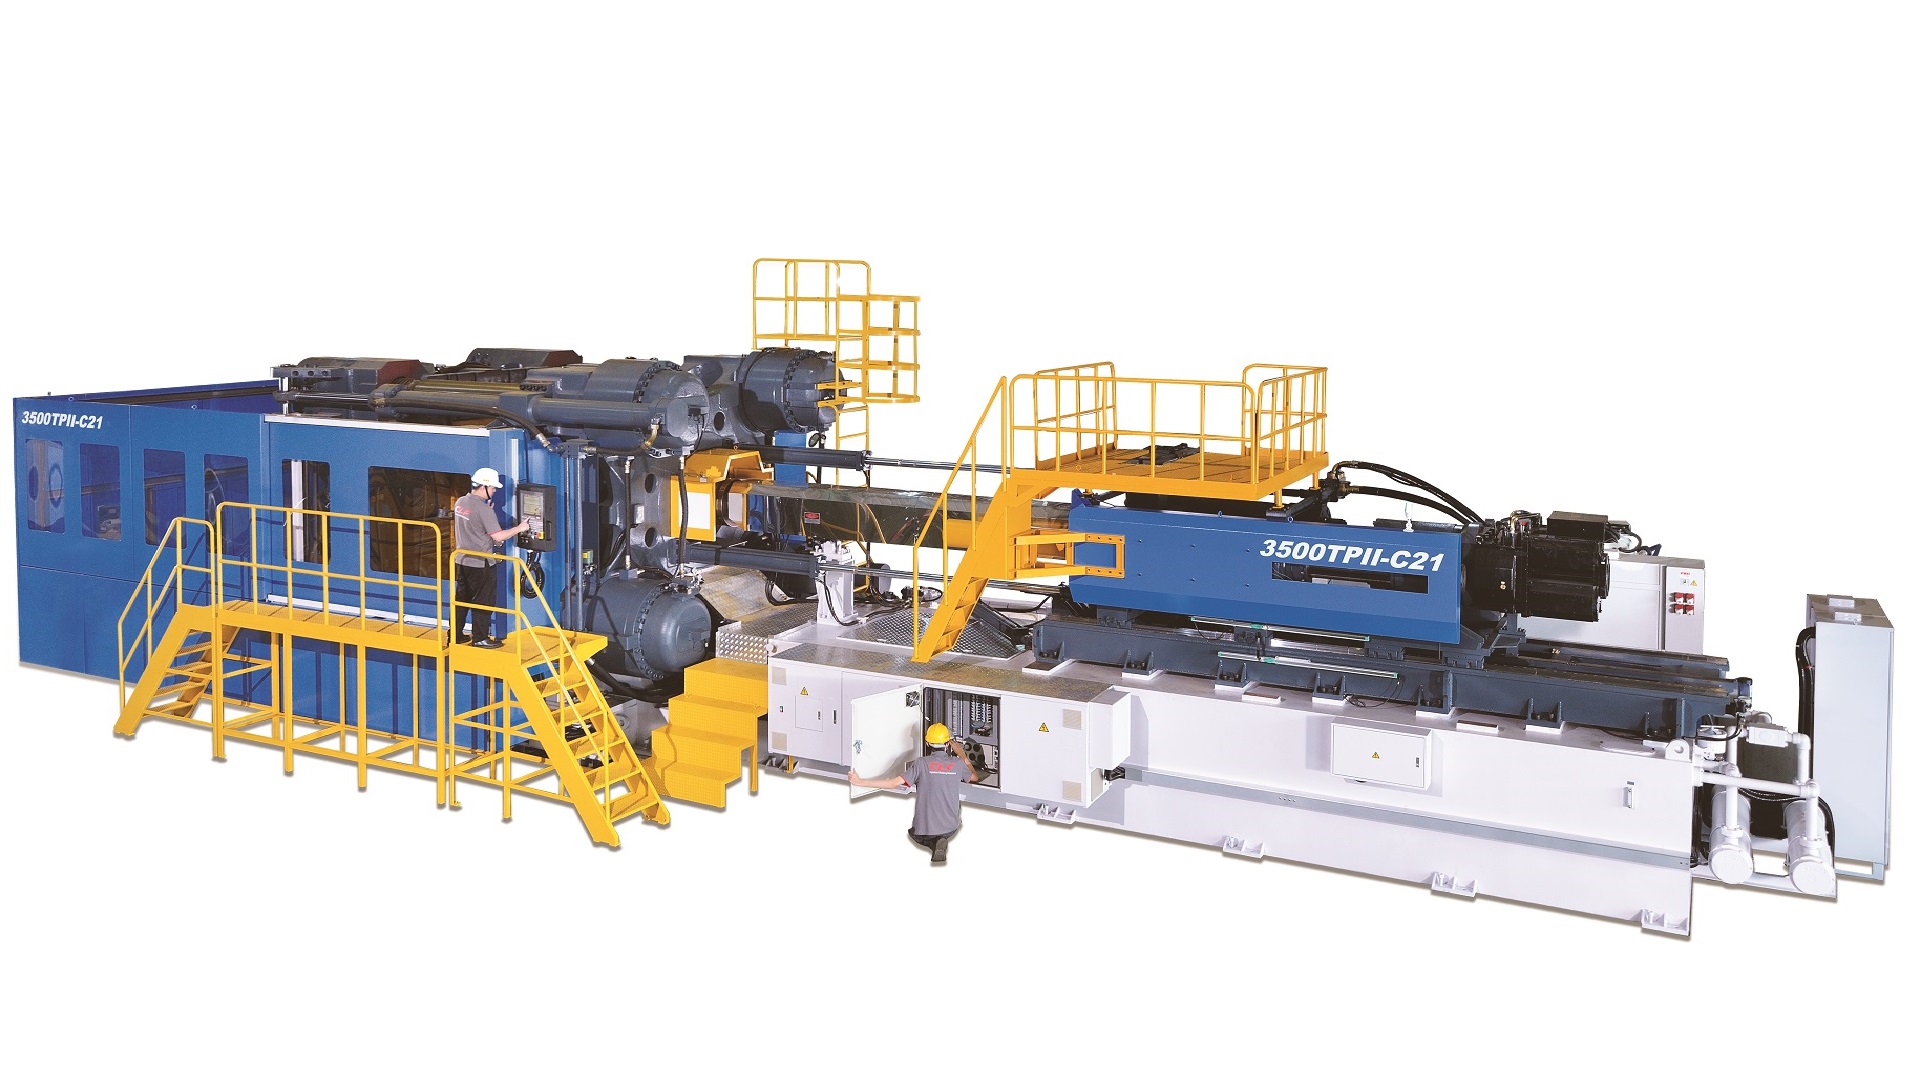 A New Generation Of Ultra-Large Energy-Efficient Two-Platen Plastic Injection Molding Machine